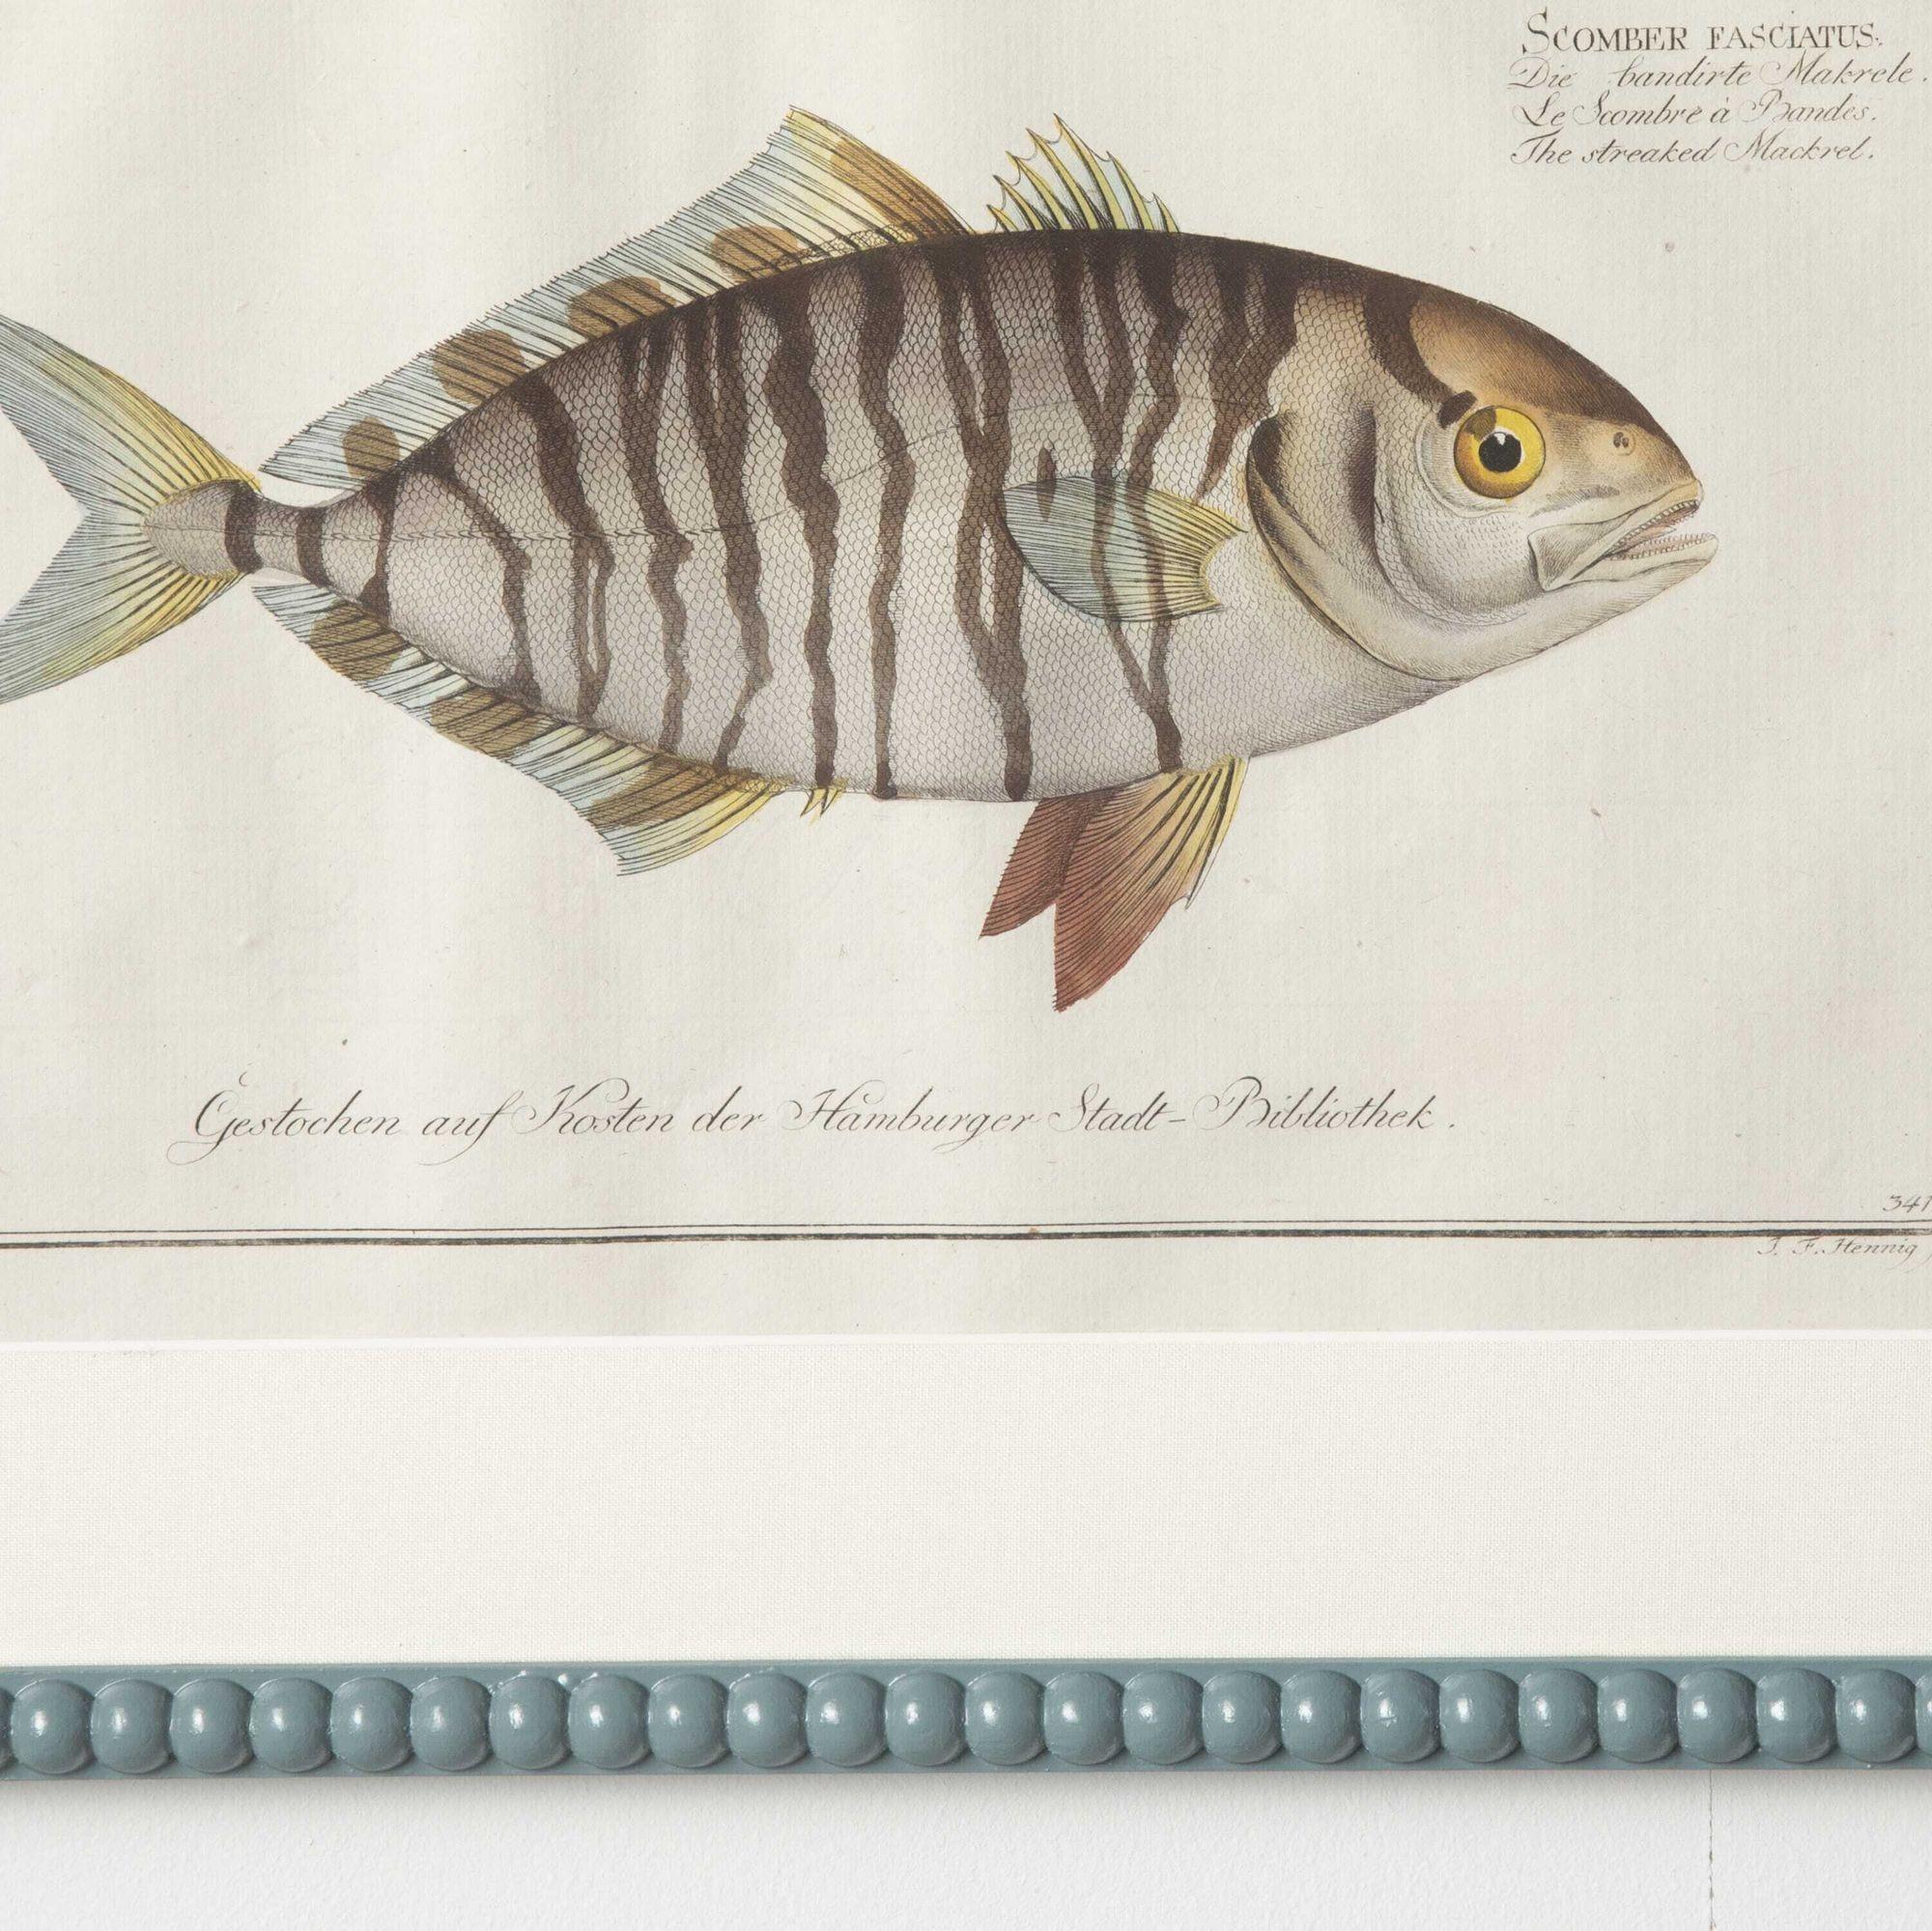 Superb set of nine original fish engravings by Marcus Bloch, dated 1785.
These engravings are presented in hand-painted and lacquered bobbin frames with Ar70 art glass for optimal clarity and hessian mounts.
These engravings are a fantastic